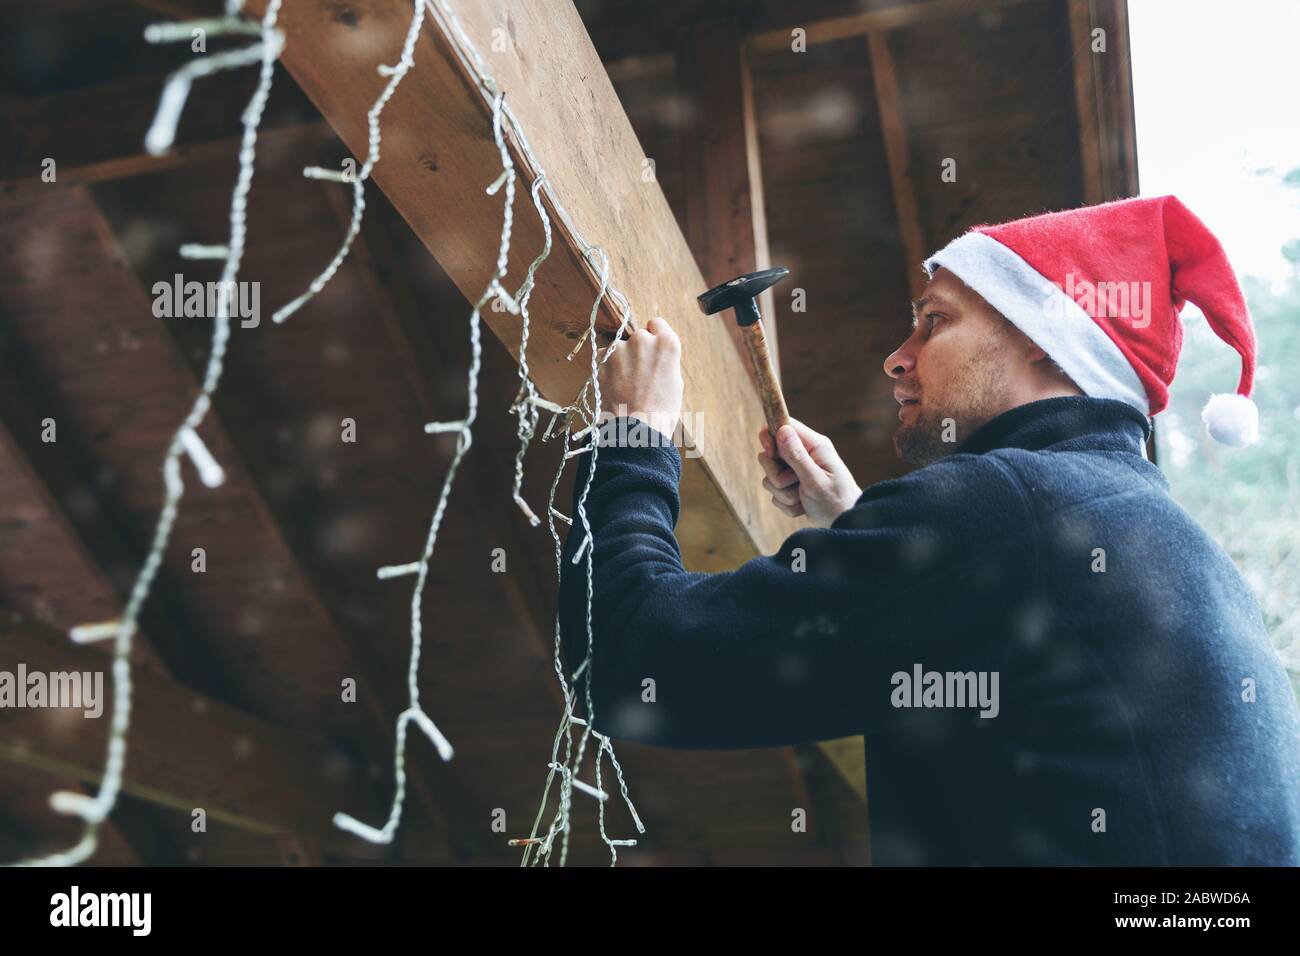 man with santa hat decorating house outdoor carport with christmas string lights Stock Photo